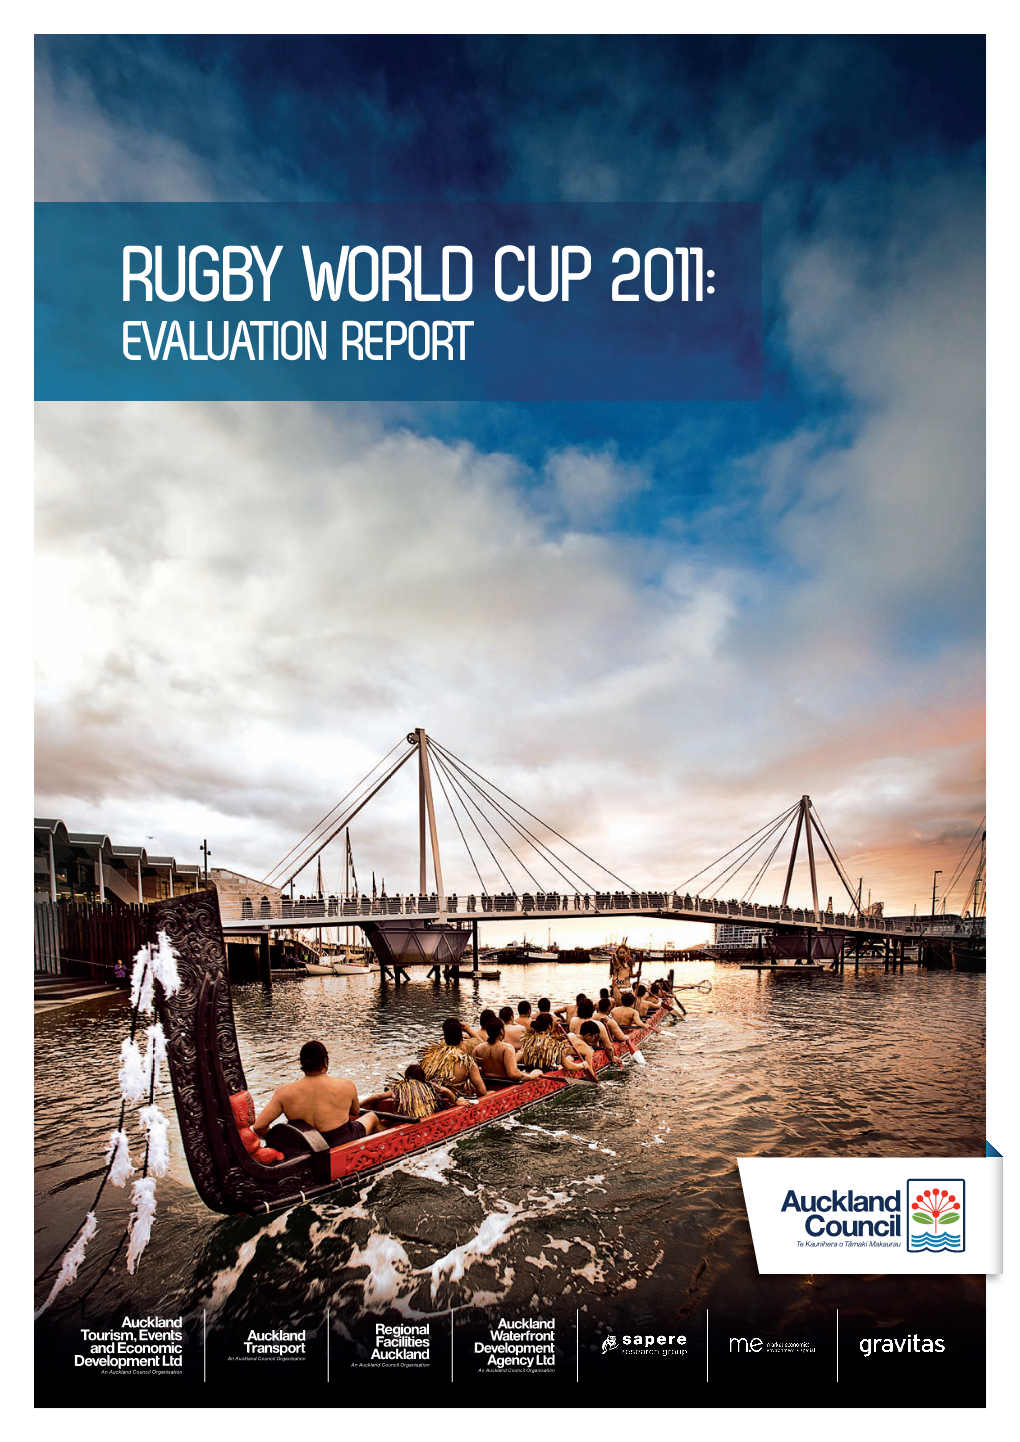 Rugby World Cup 2011: Evaluation Report Message from the Chief Executive